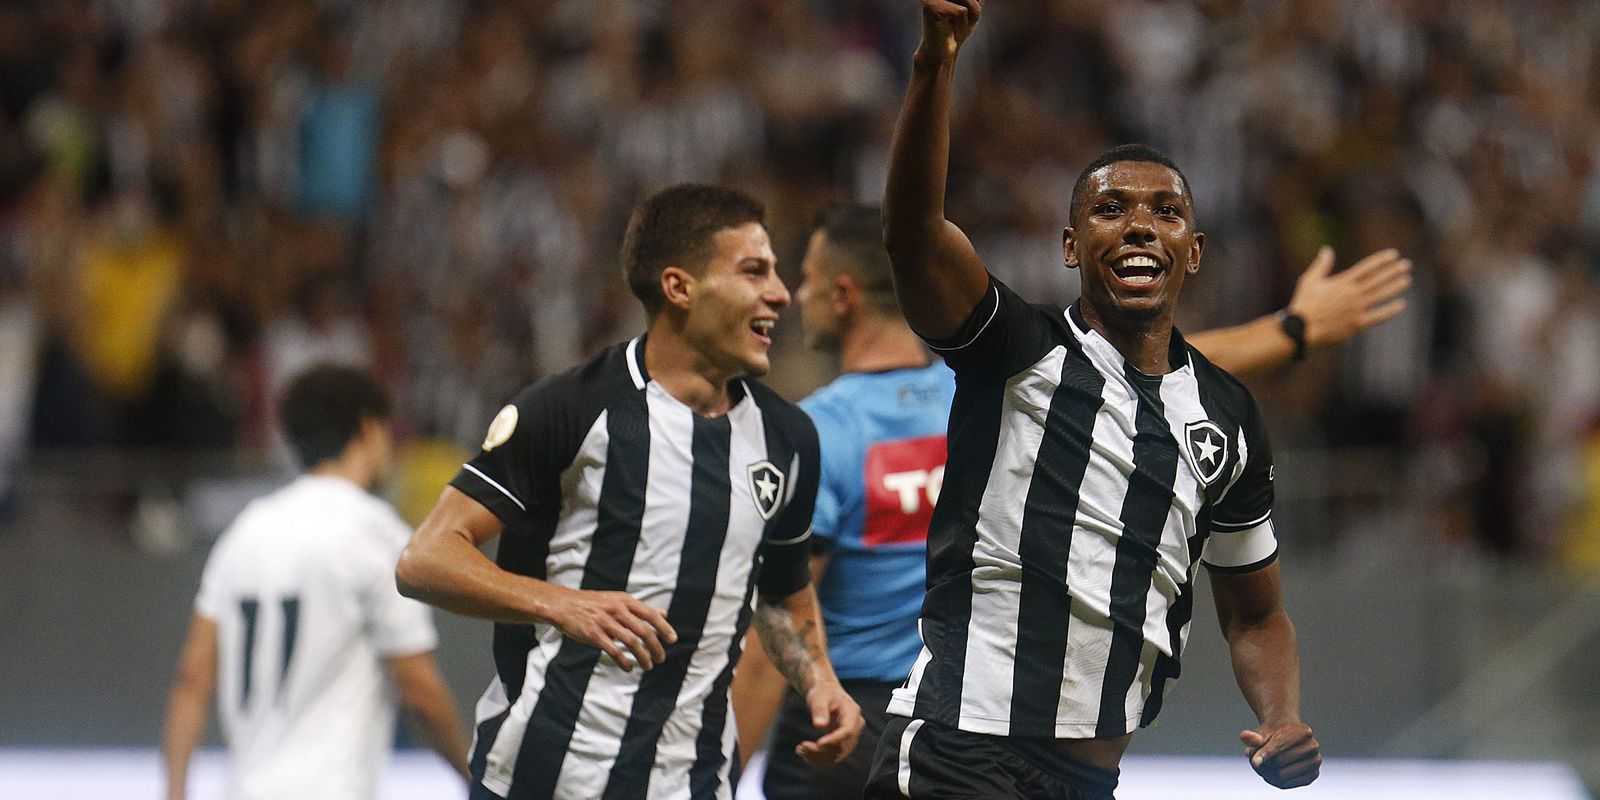 Botafogo debut with victory in the Copa do Brasil